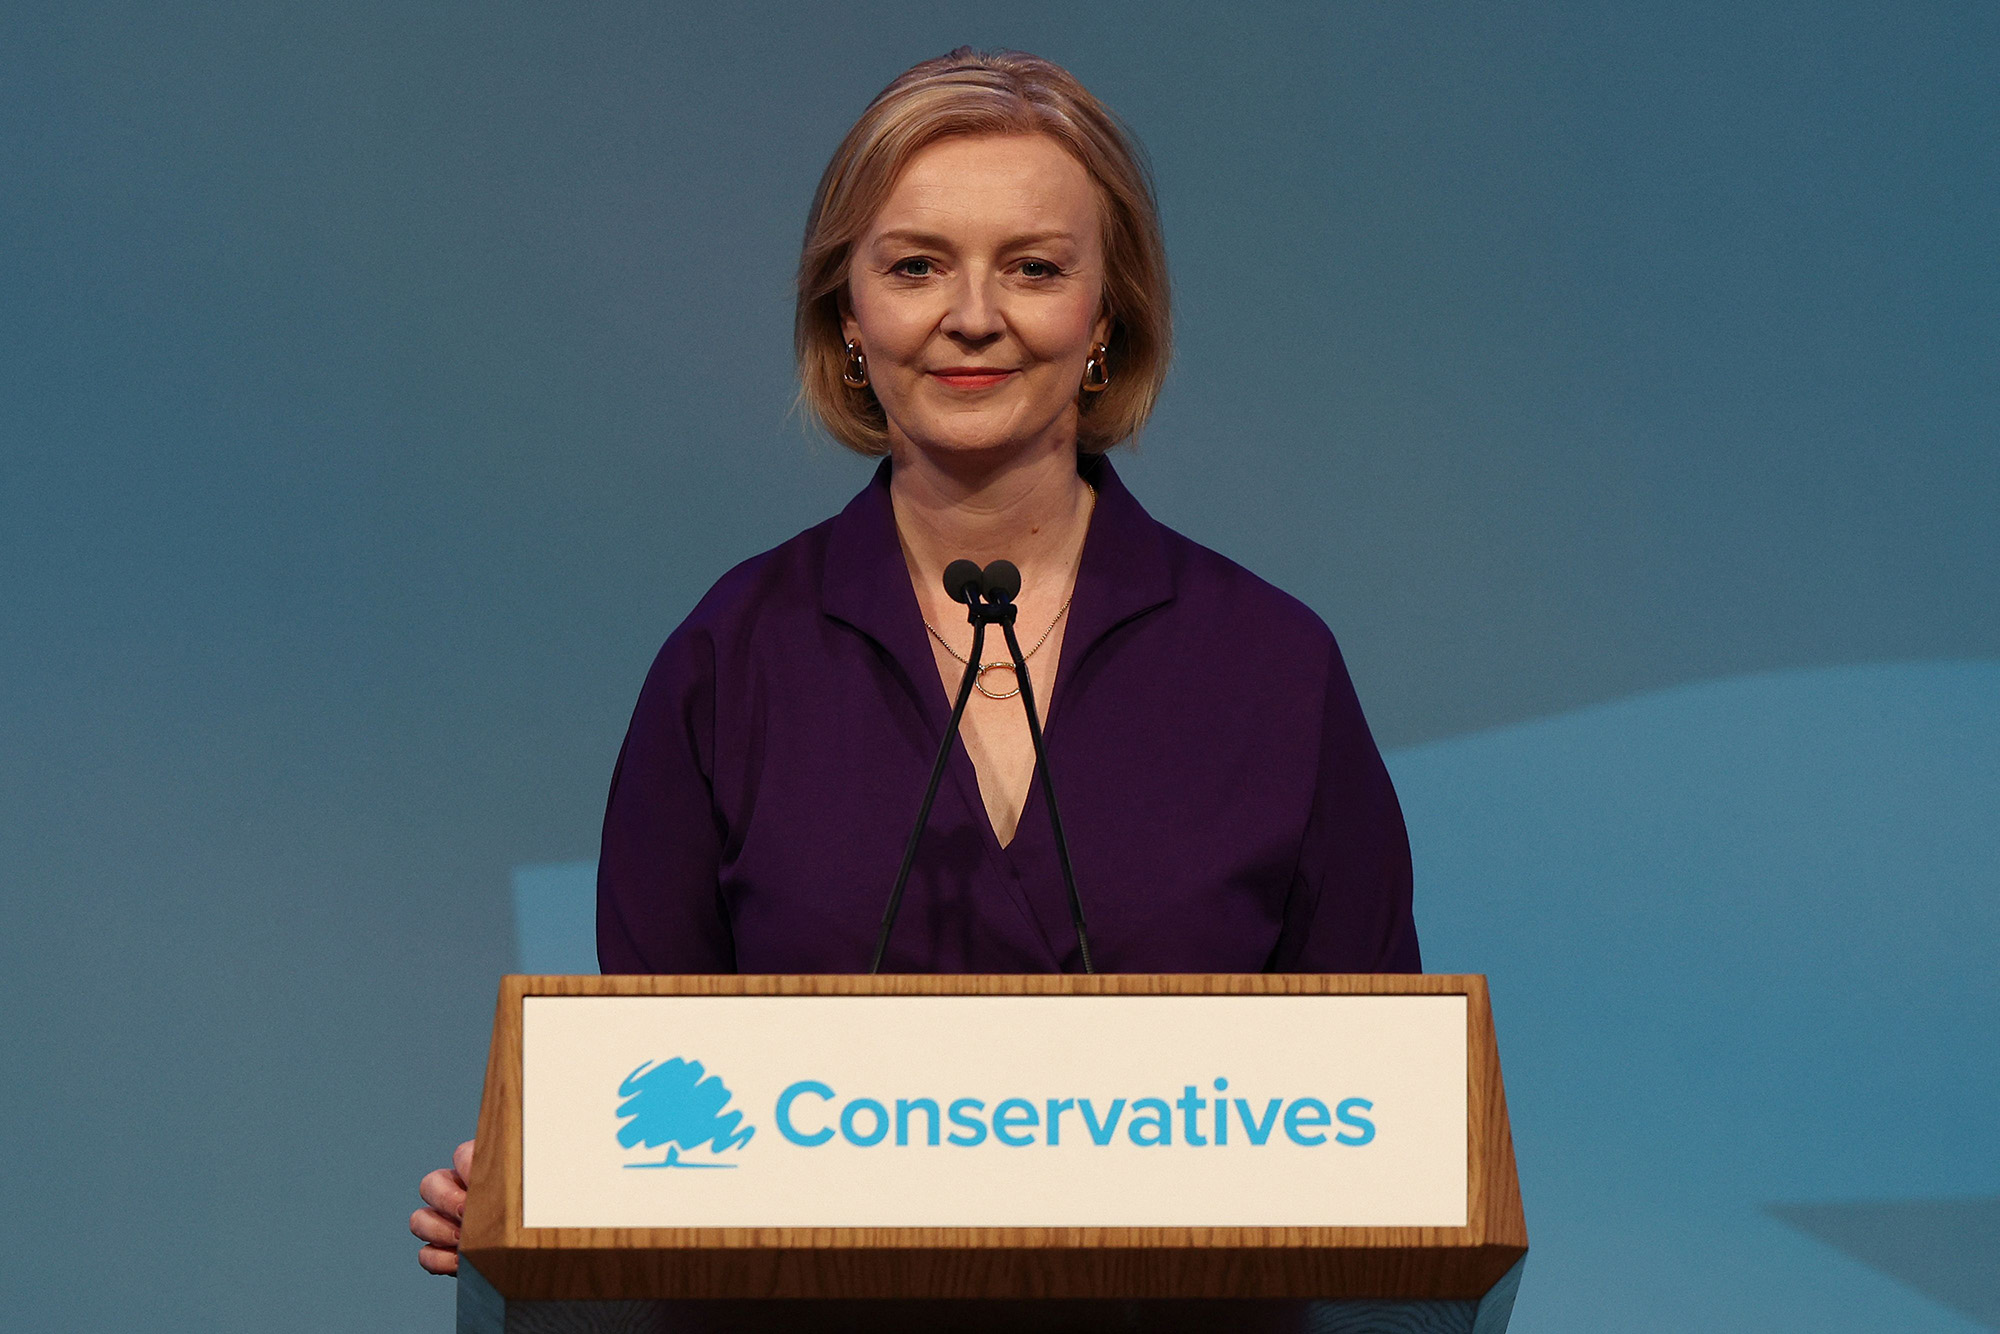 New Conservative Party leader and Britain's Prime Minister-elect Liz Truss delivers a speech at an event to announce the winner of the Conservative Party leadership contest in central London on September 5.